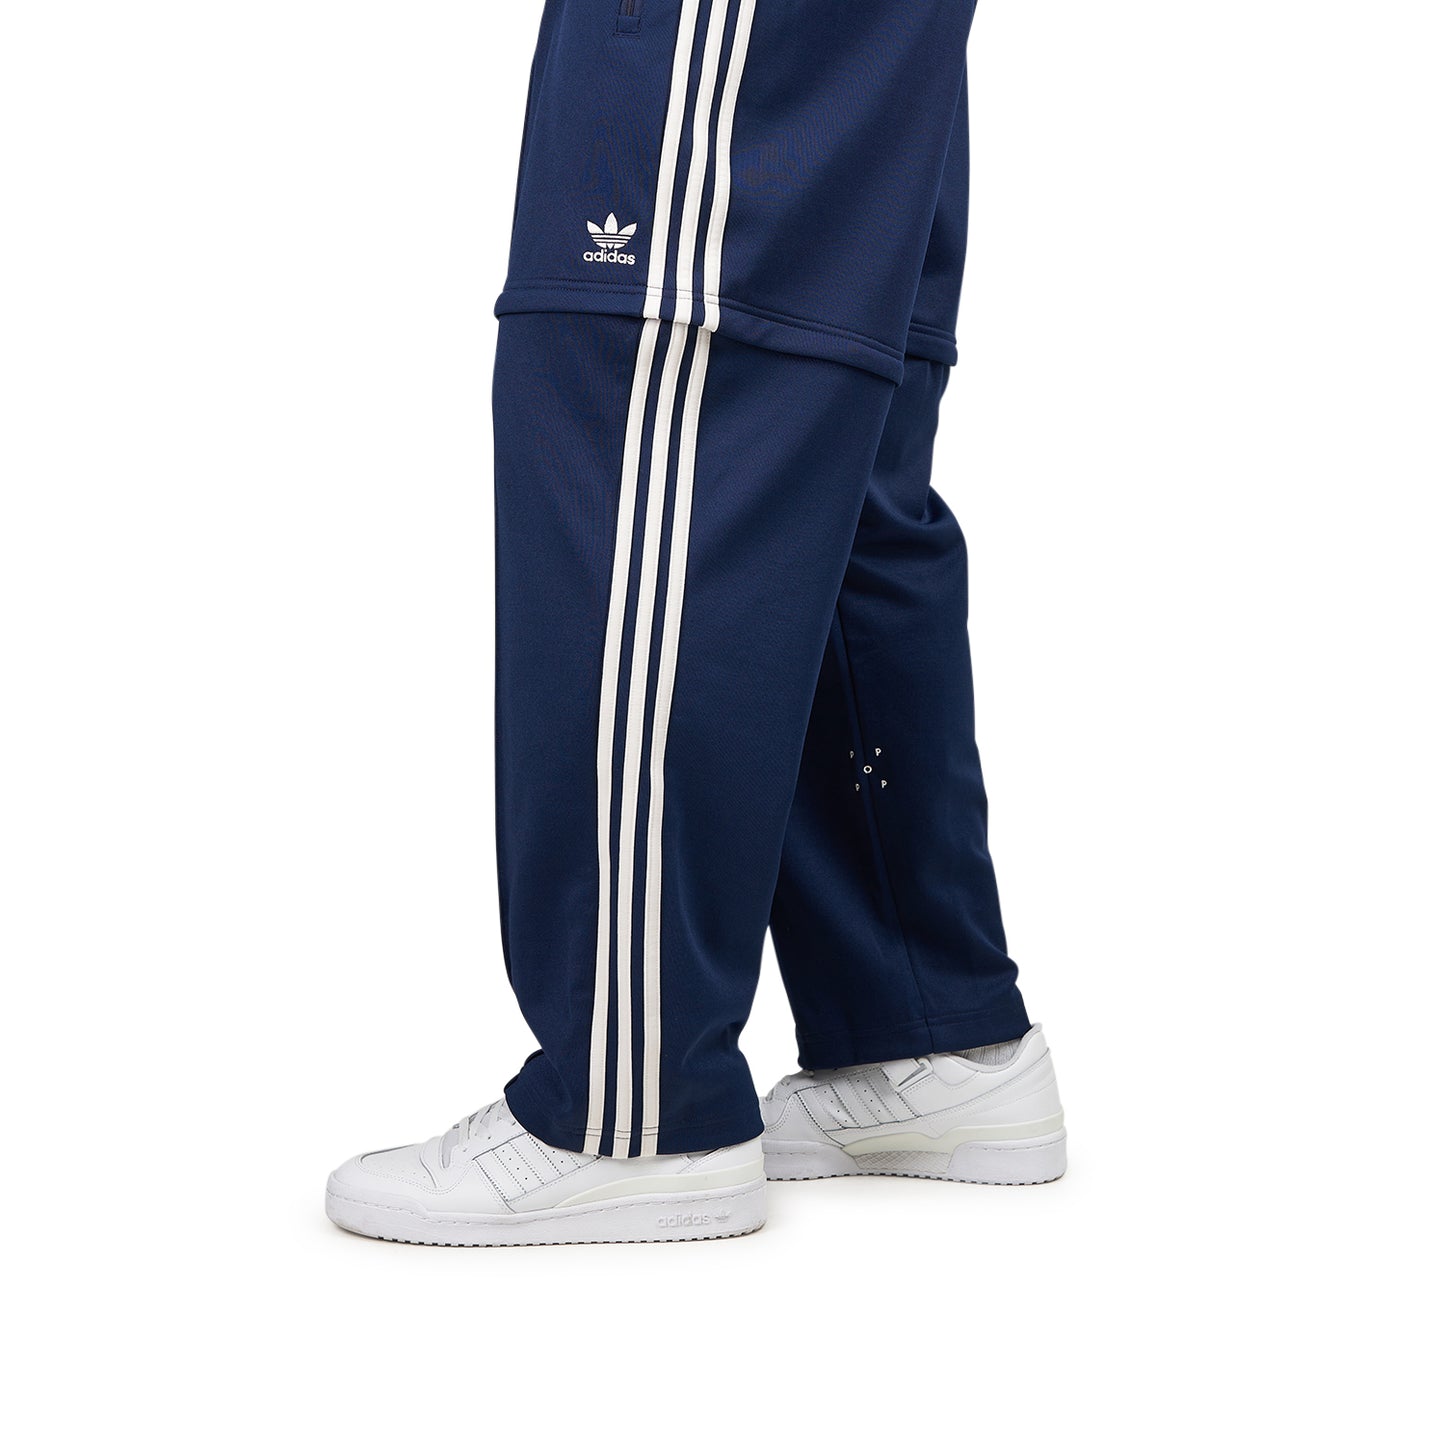 adidas x Pop Trading Company Bauer Track Pants (Navy / Weiß)  - Allike Store